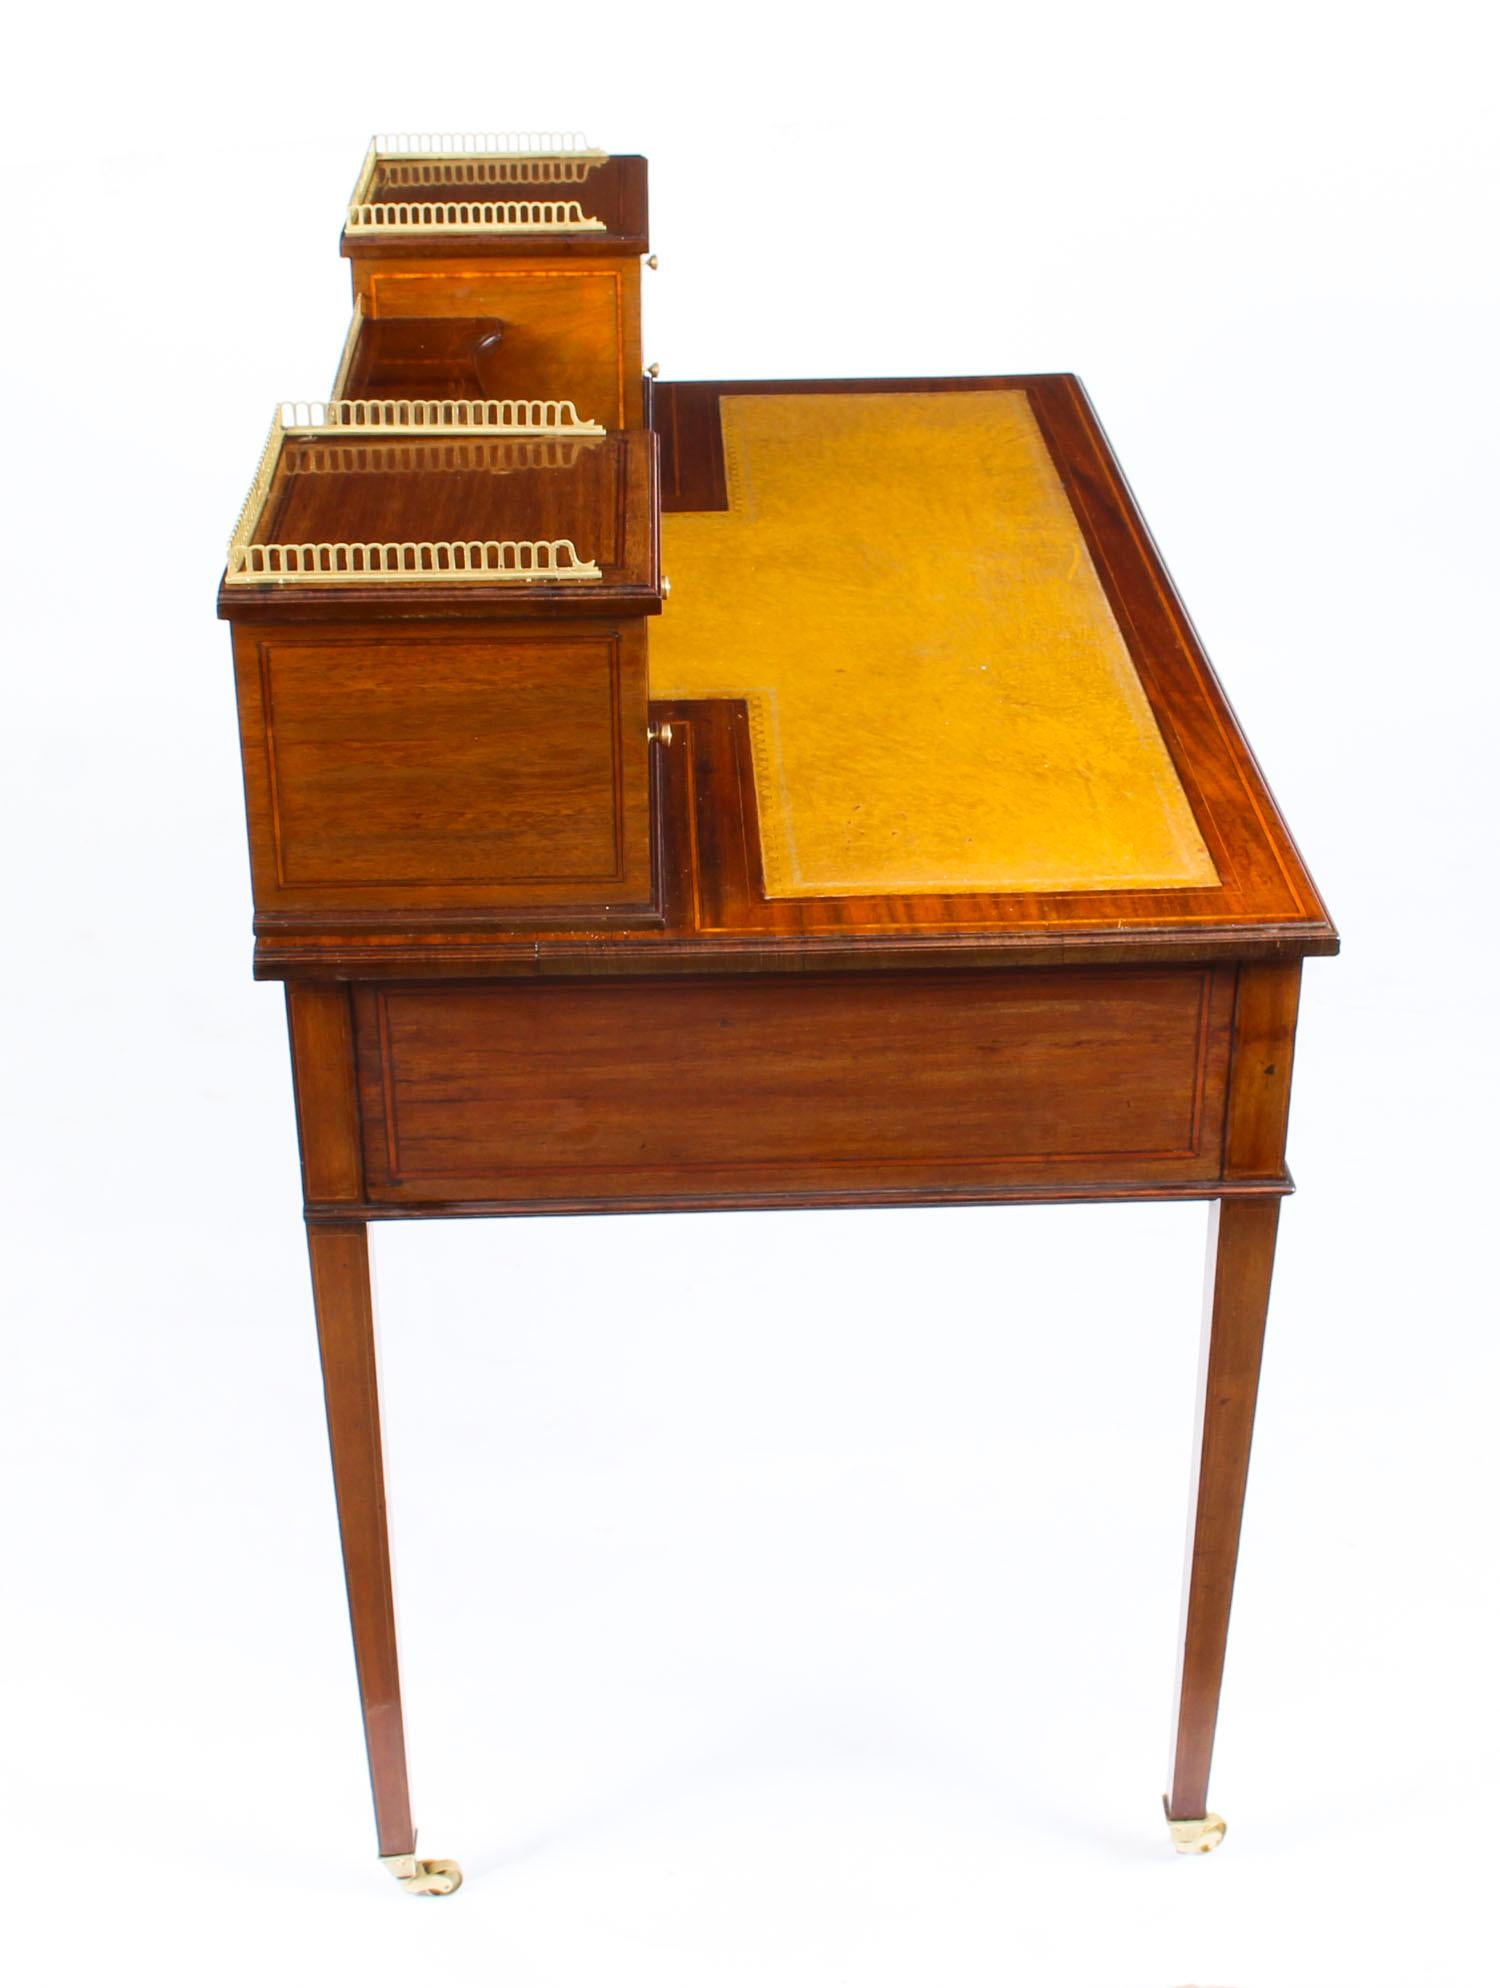 Antique Edwardian Mahogany and Marquetry Writing Table Desk, Early 20th Century 11